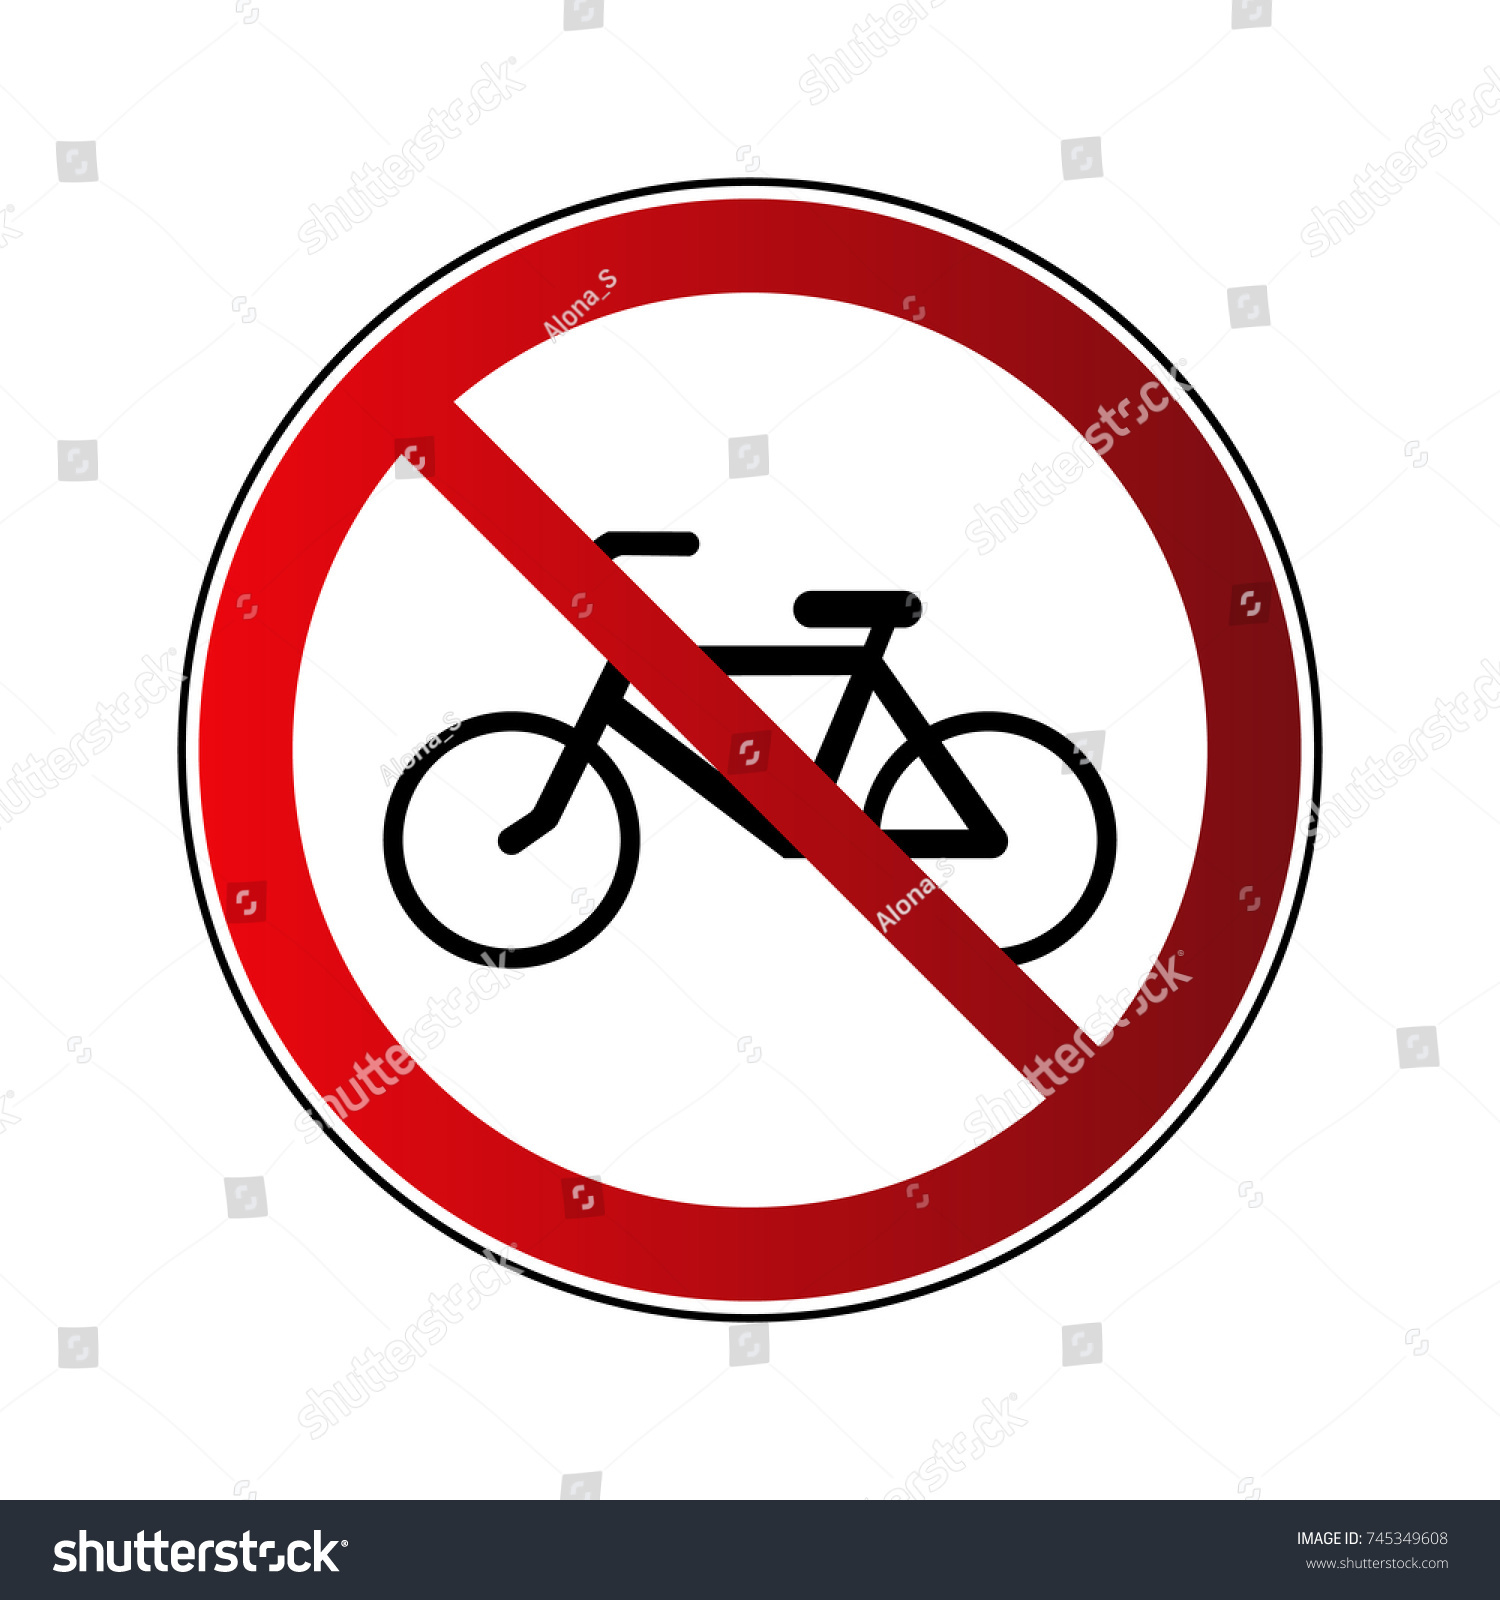 No Bicycle Sign Forbidden Red Road Stock Vector 745349608 - Shutterstock